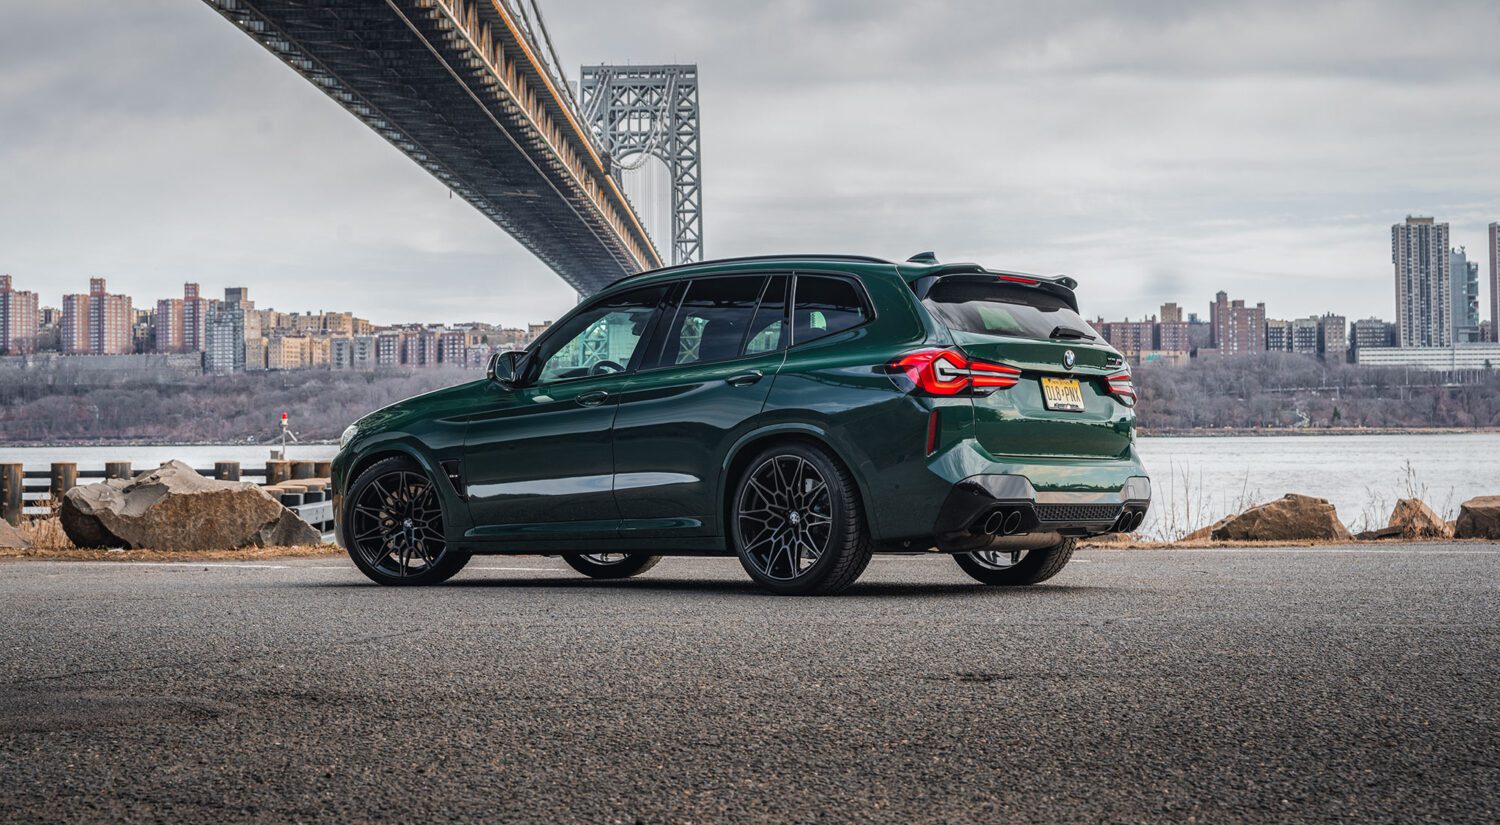 Fratricide: The 2022 BMW X3 M Review